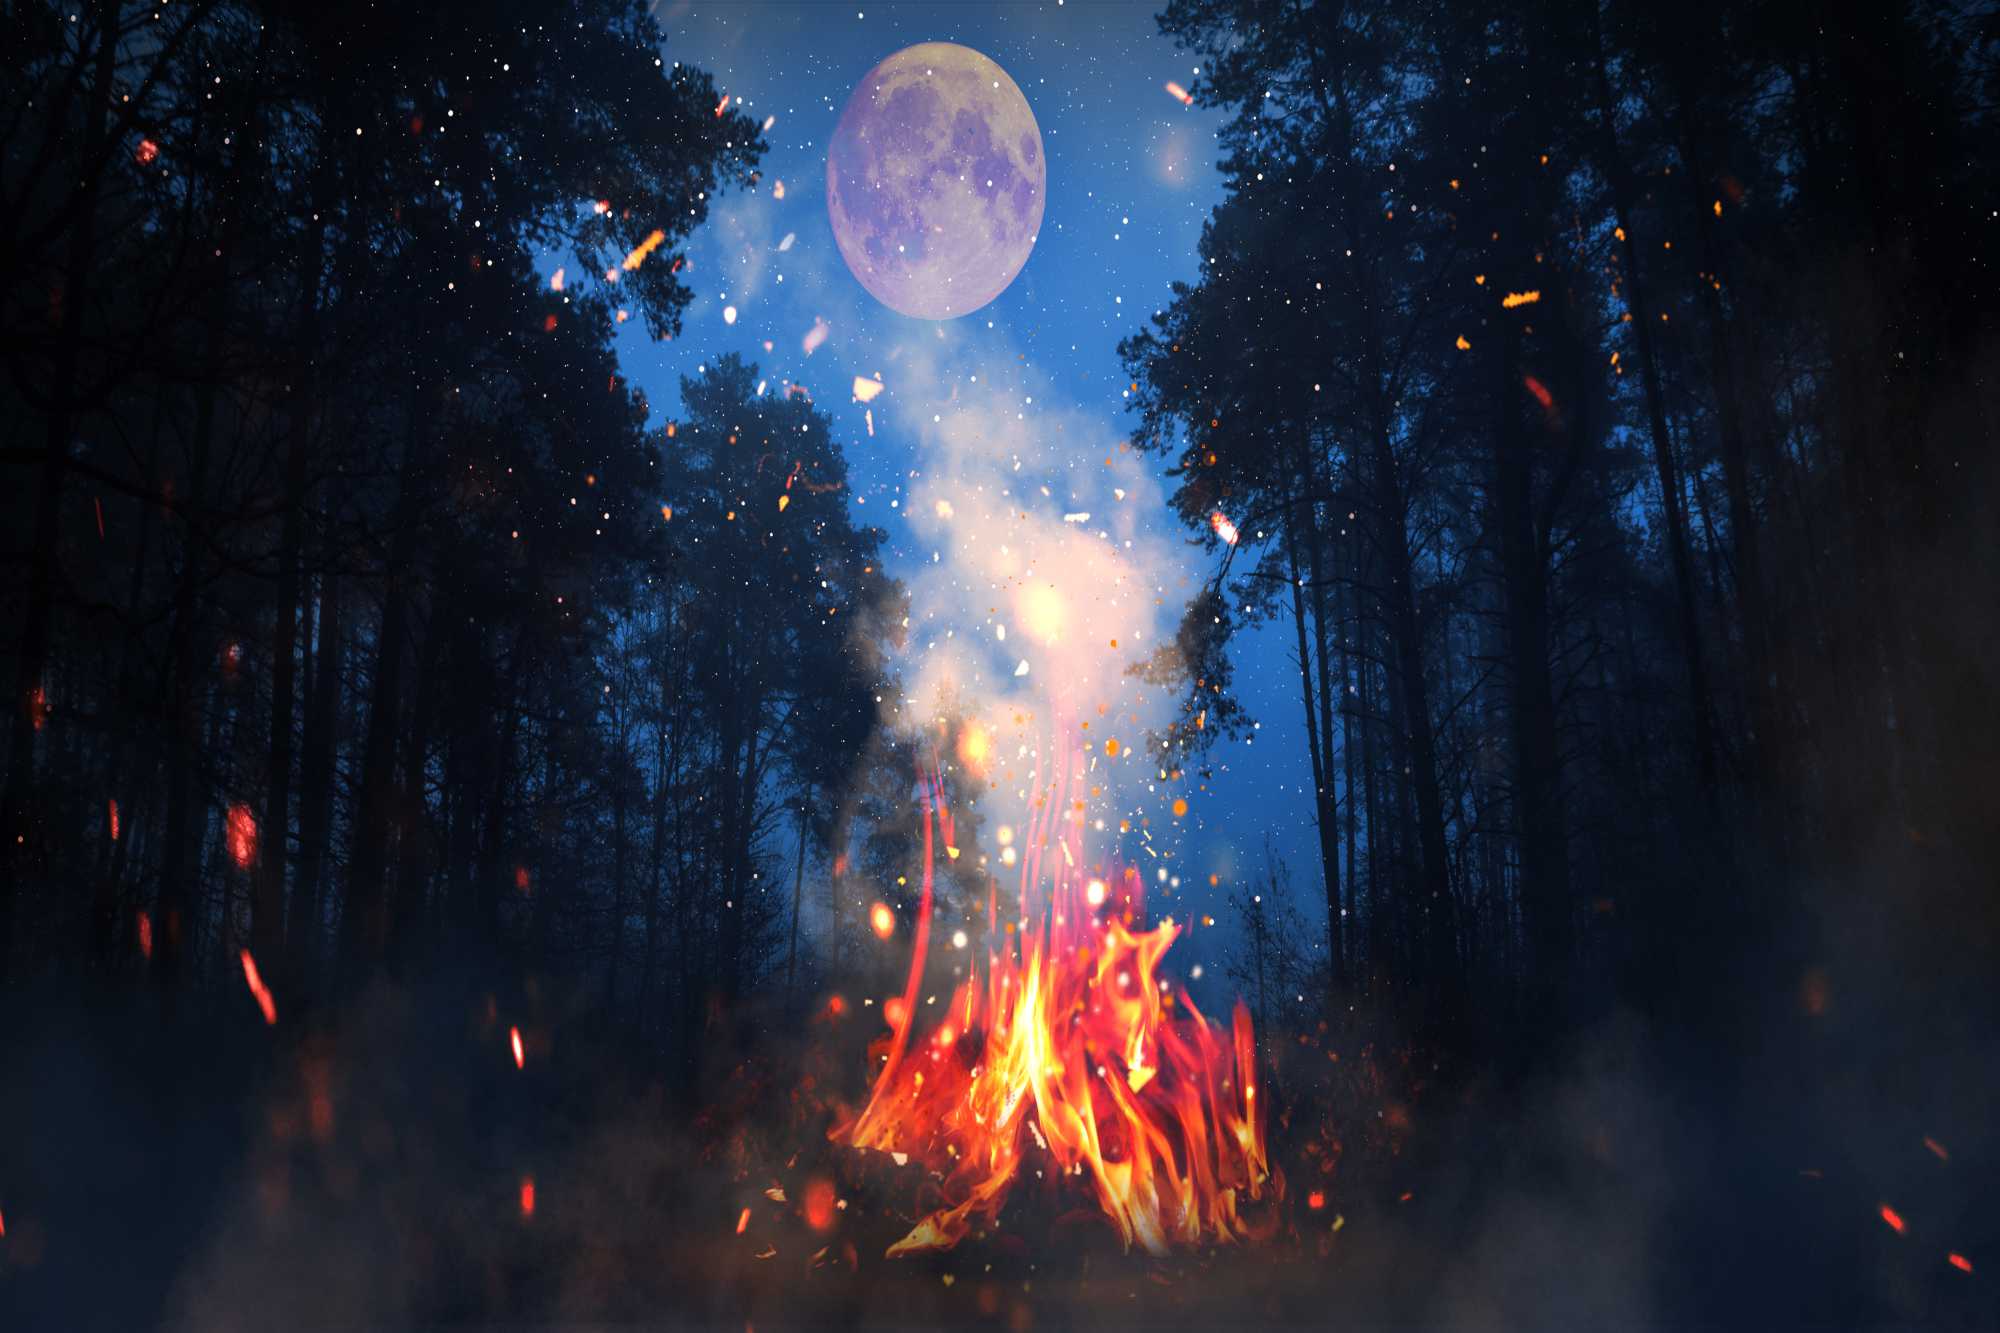 Bonfire in a forest at night time